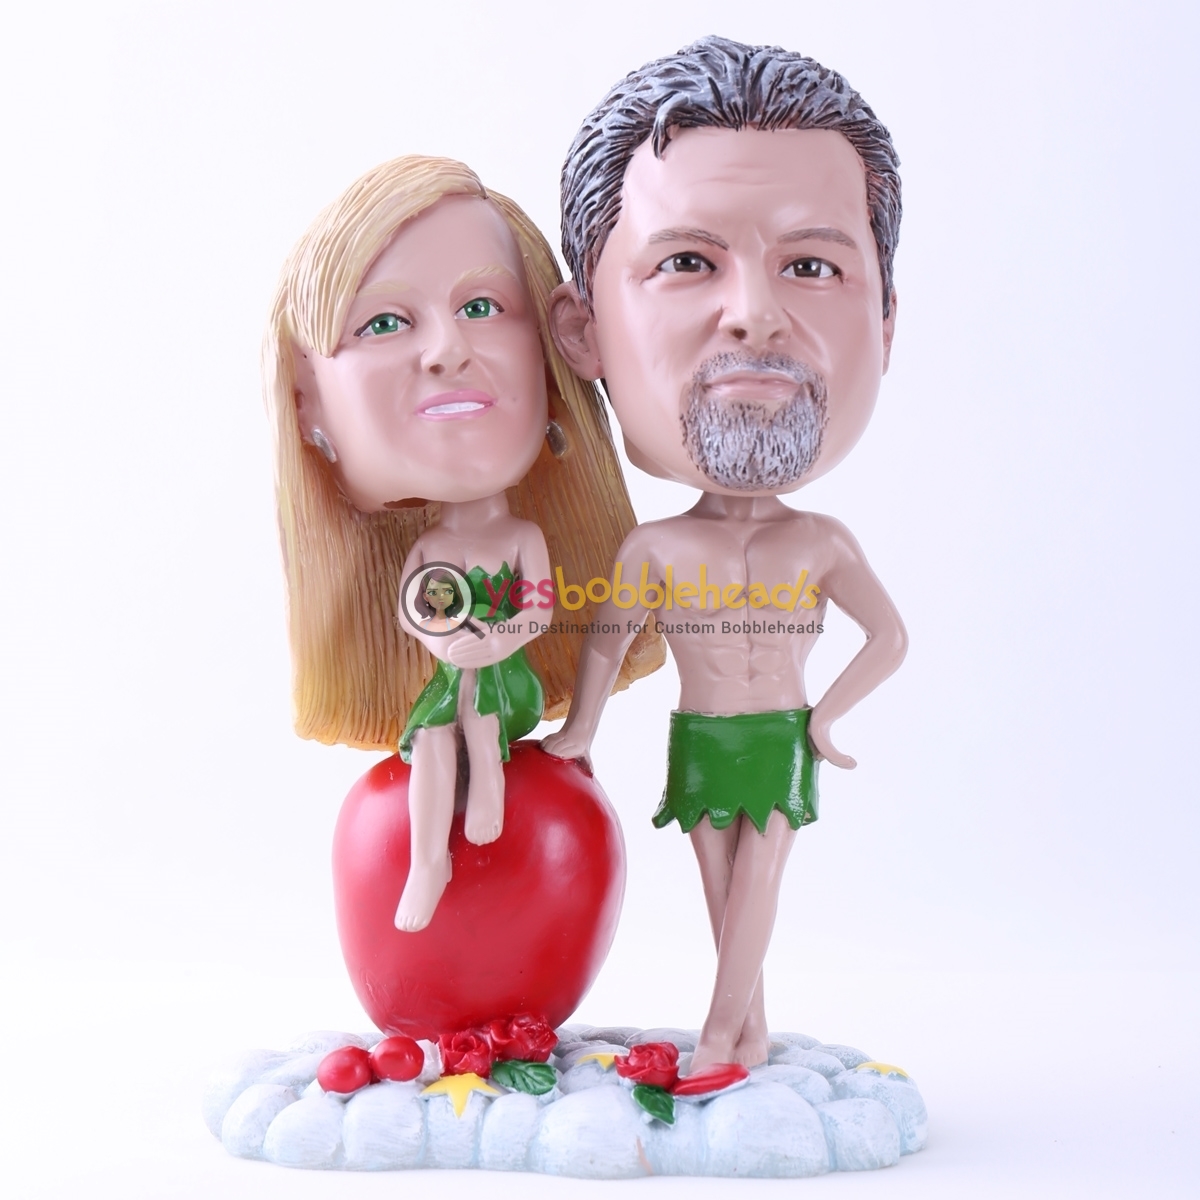 Picture of Custom Bobblehead Doll: Adam and Eve